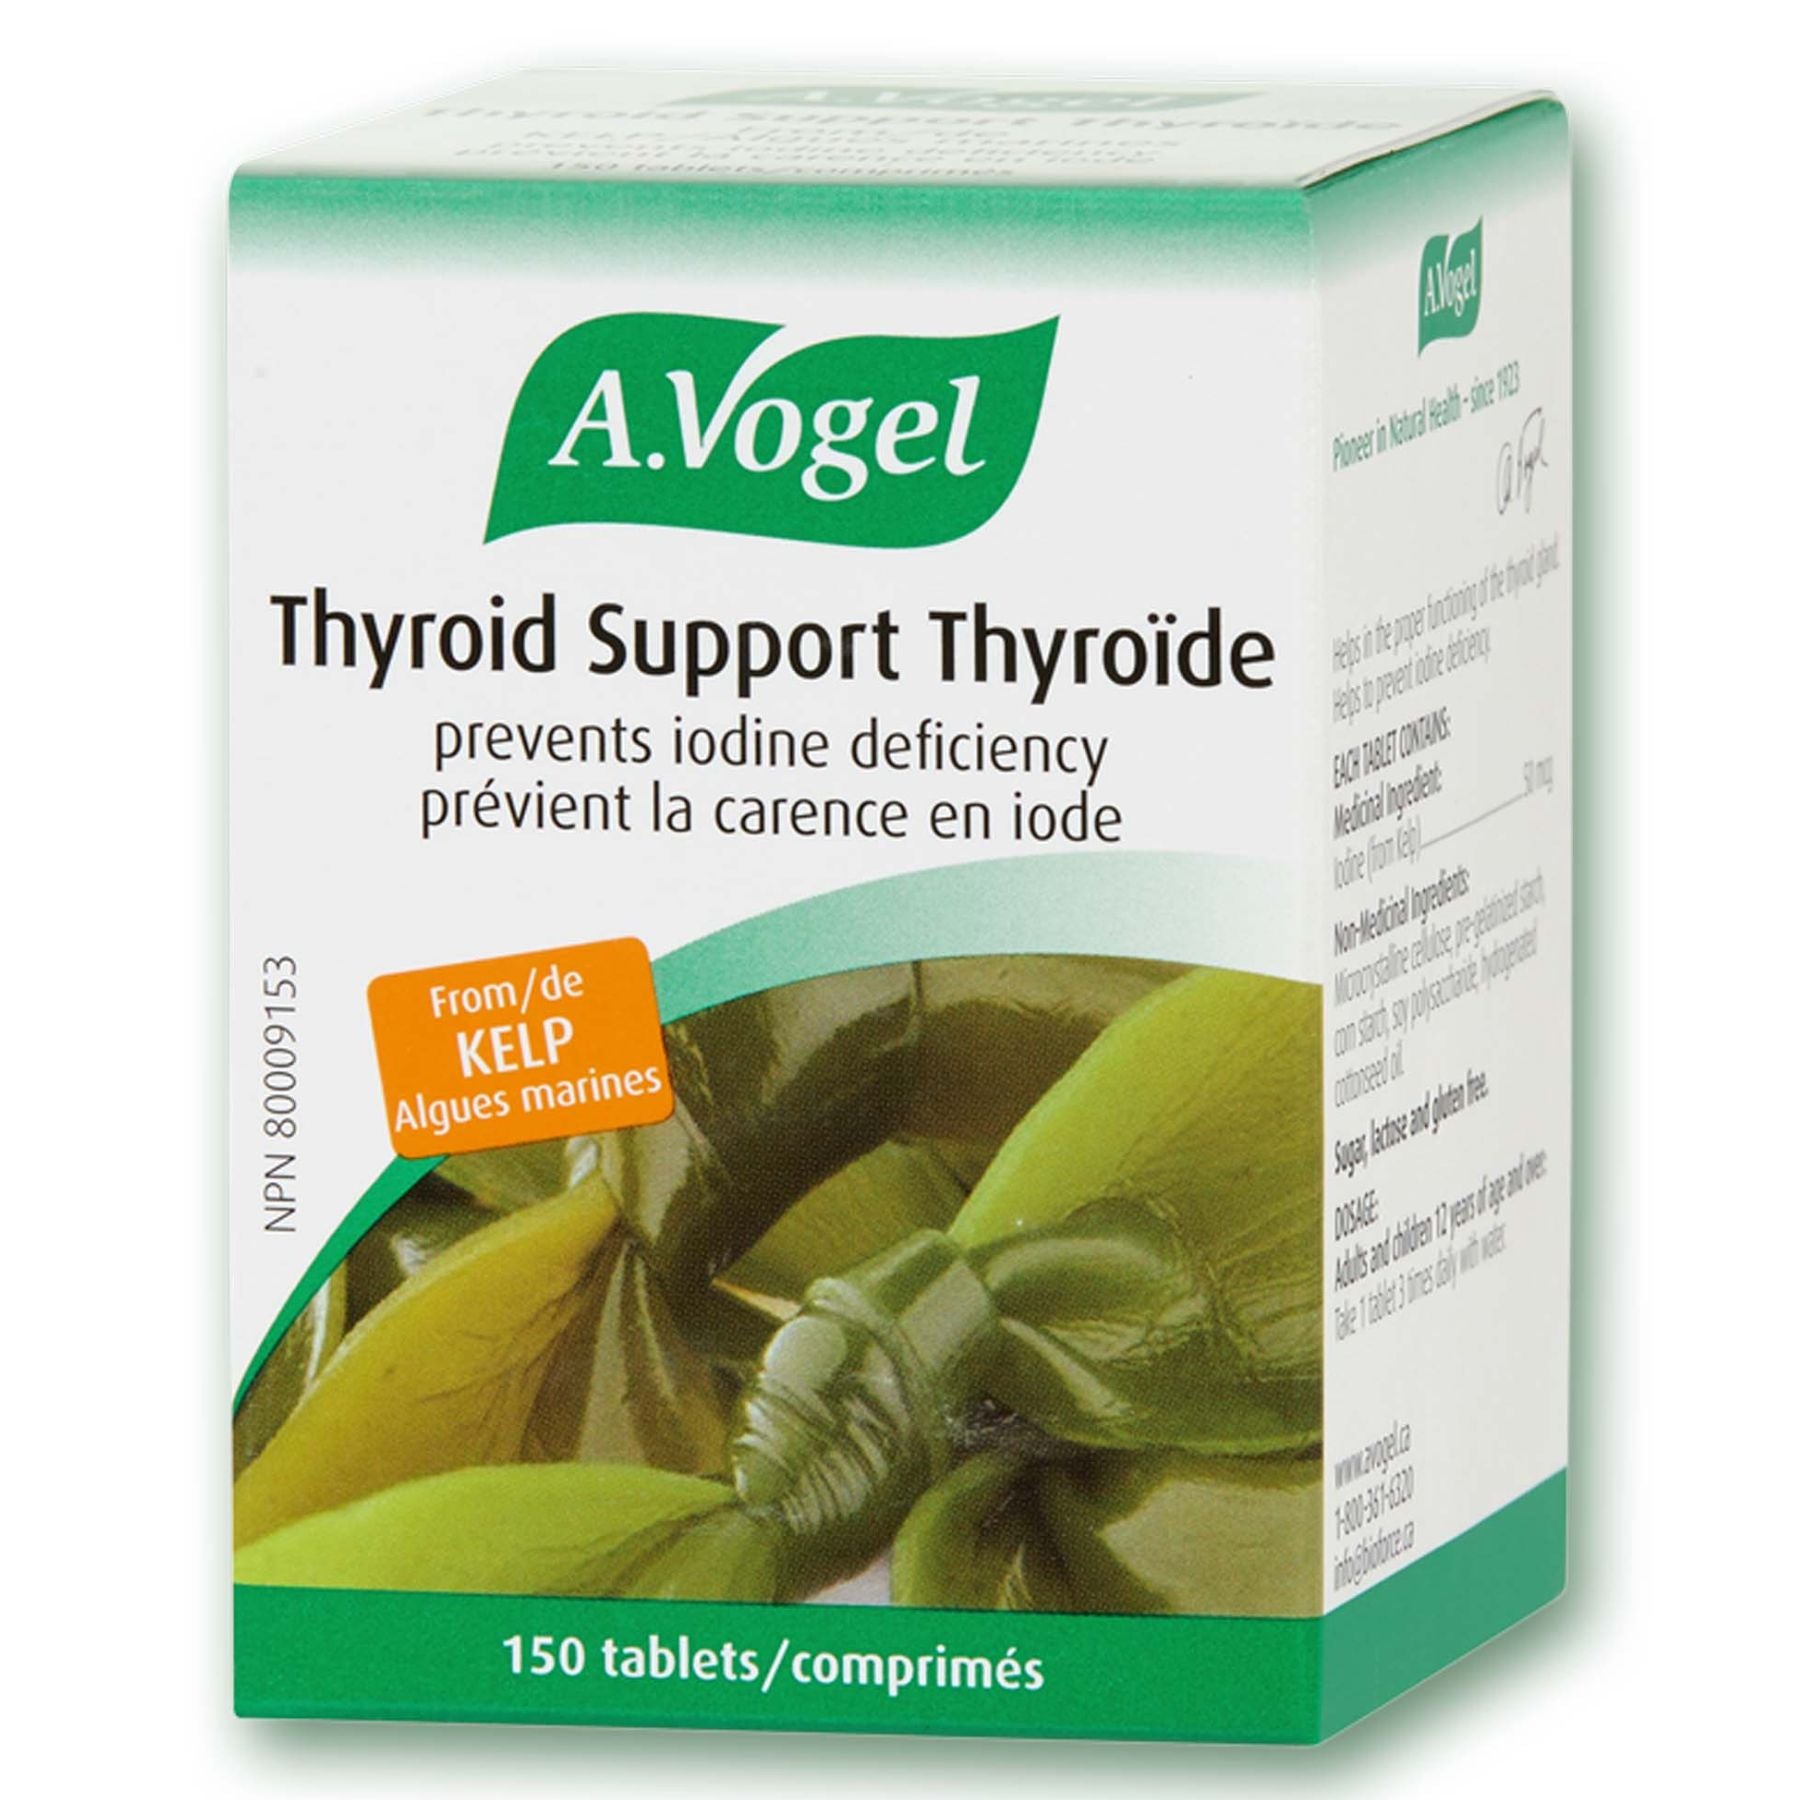 A. Vogel Thyroid Support 150s